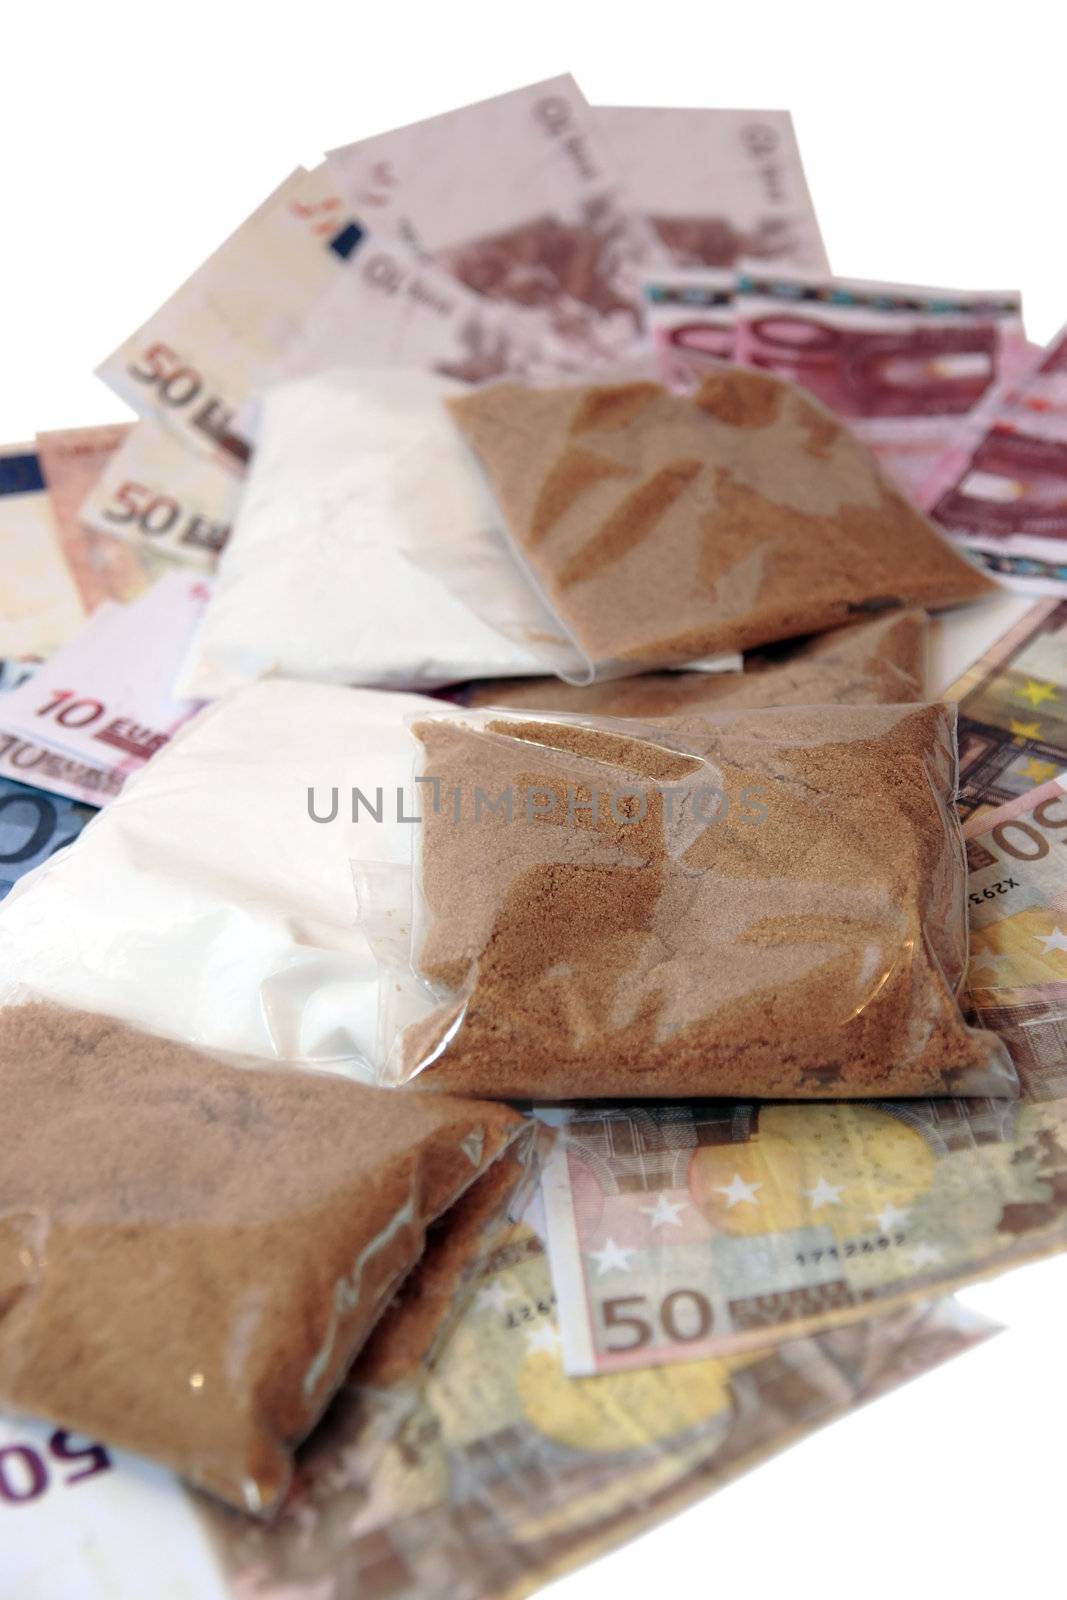 a stash of drugs and money showing a high cost to life against a white background